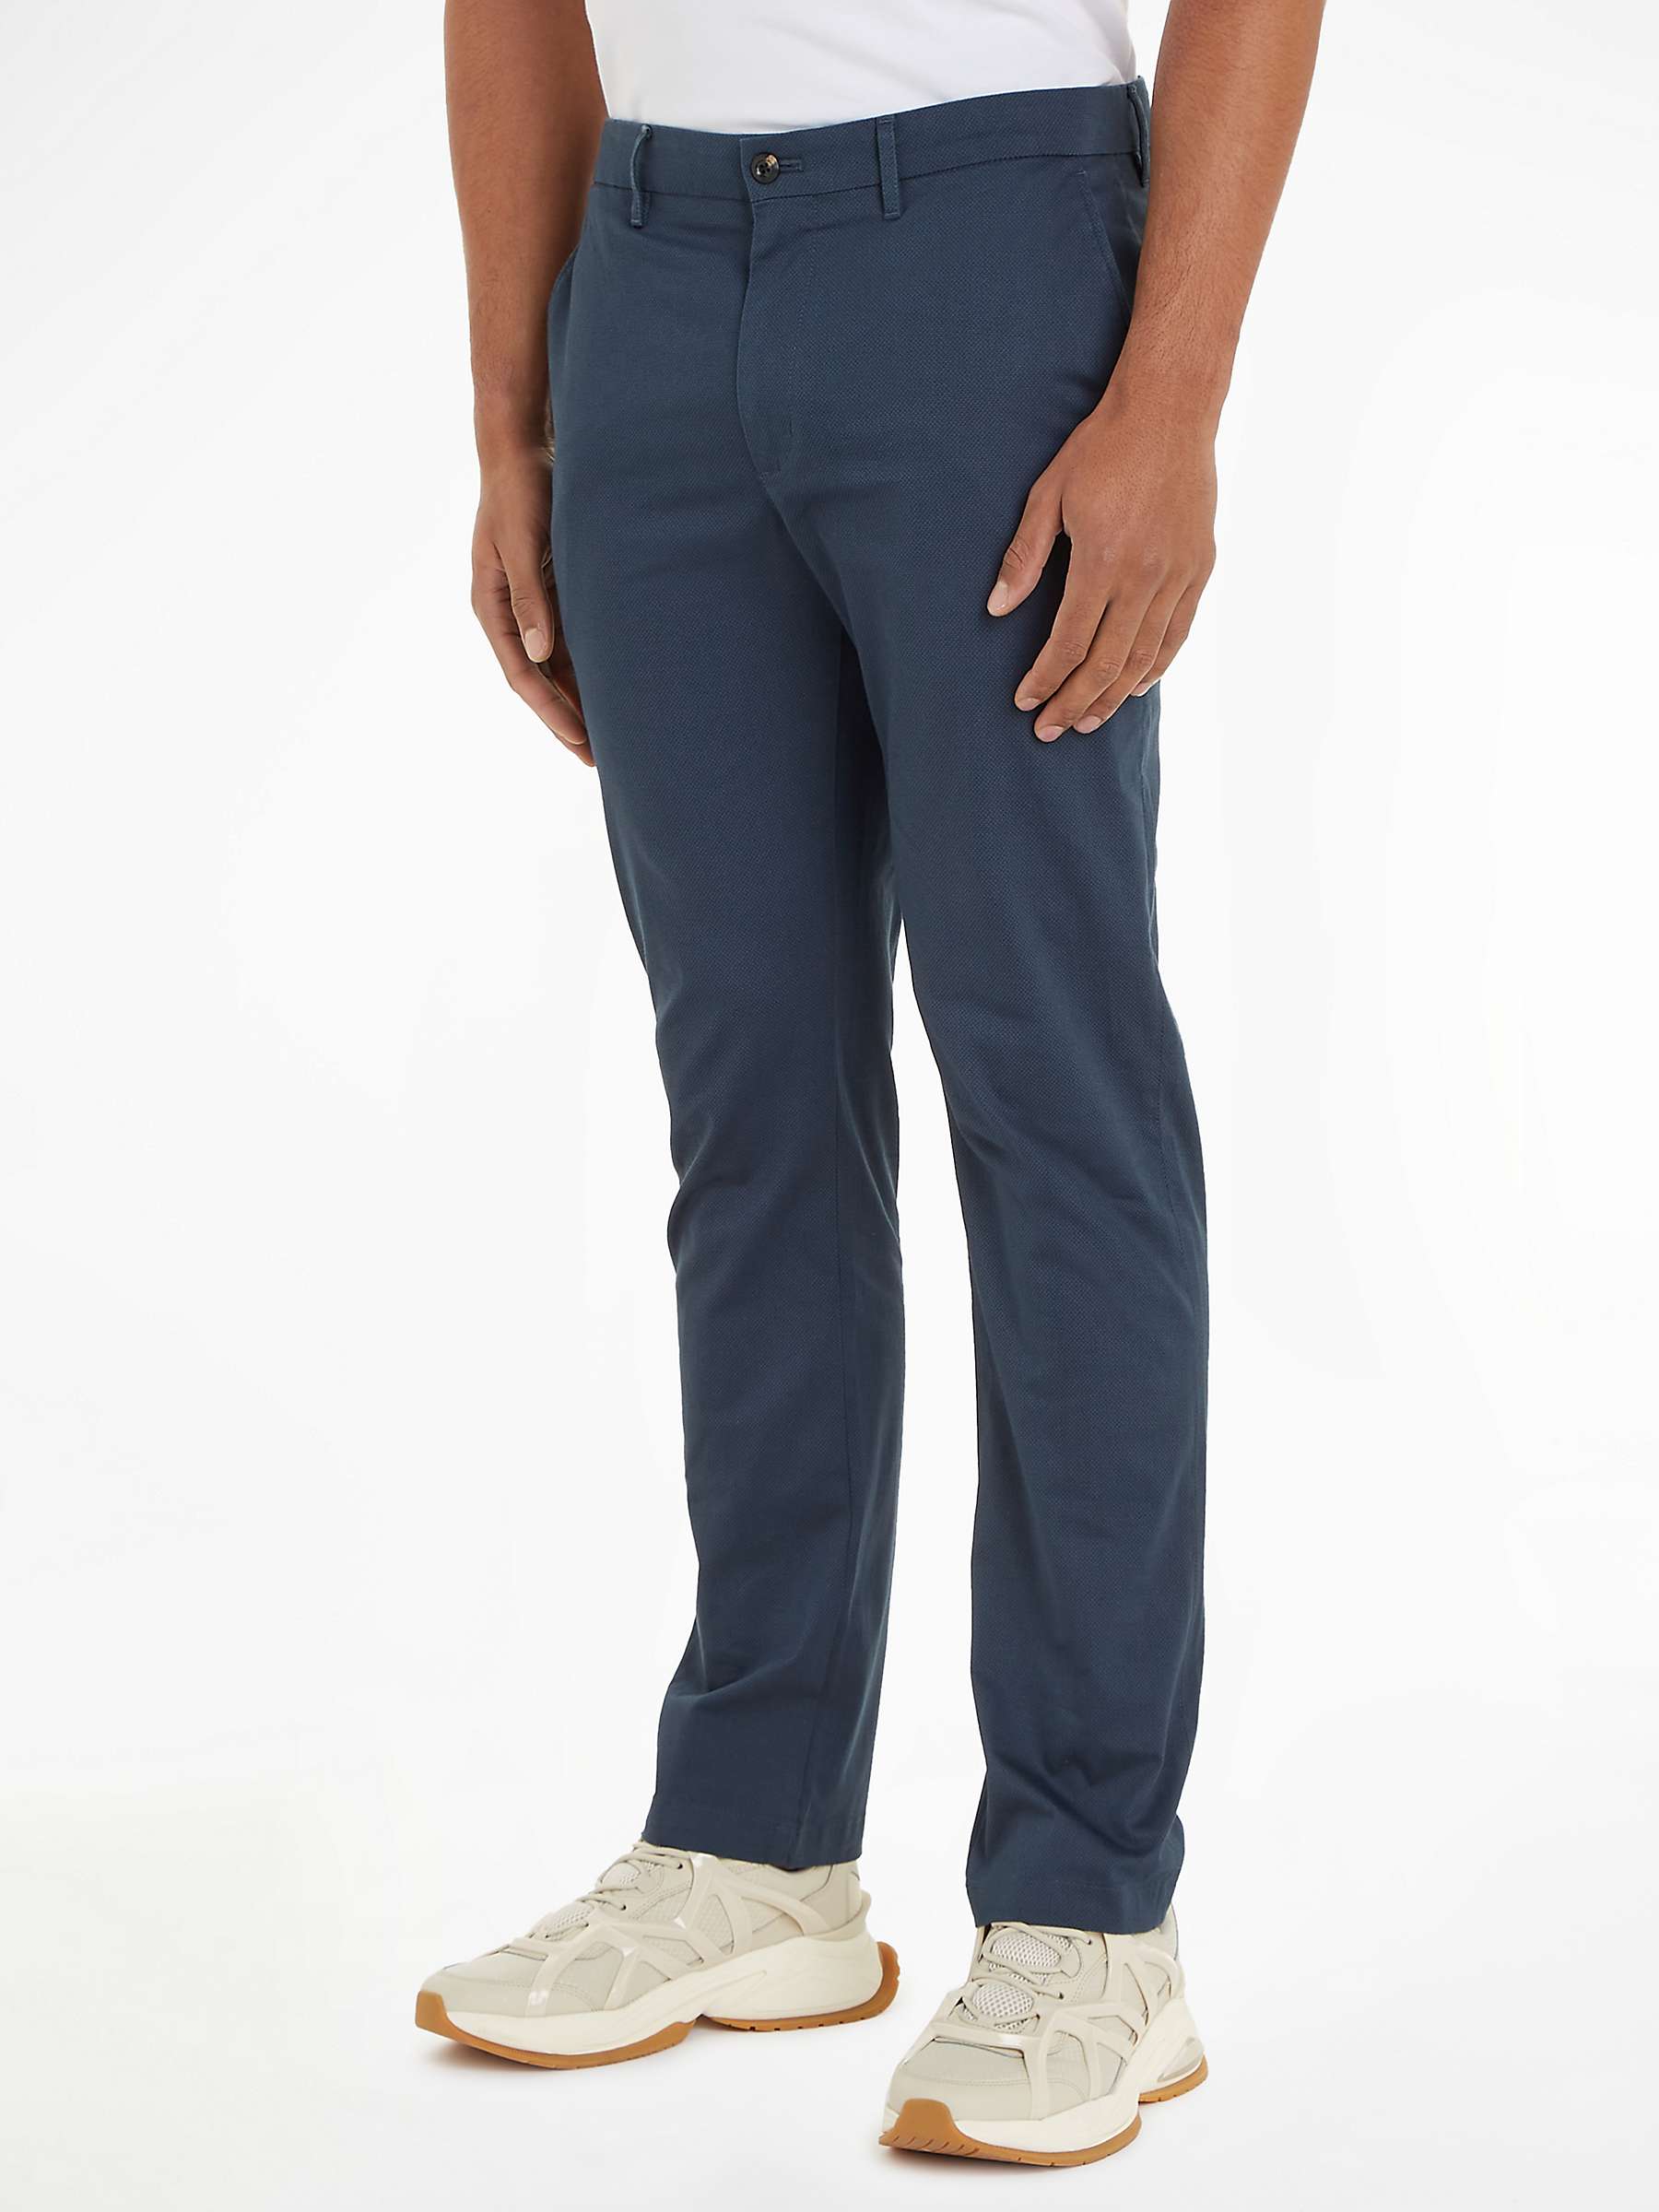 Buy Tommy Hilfiger Denton Structure Chino Trousers Online at johnlewis.com